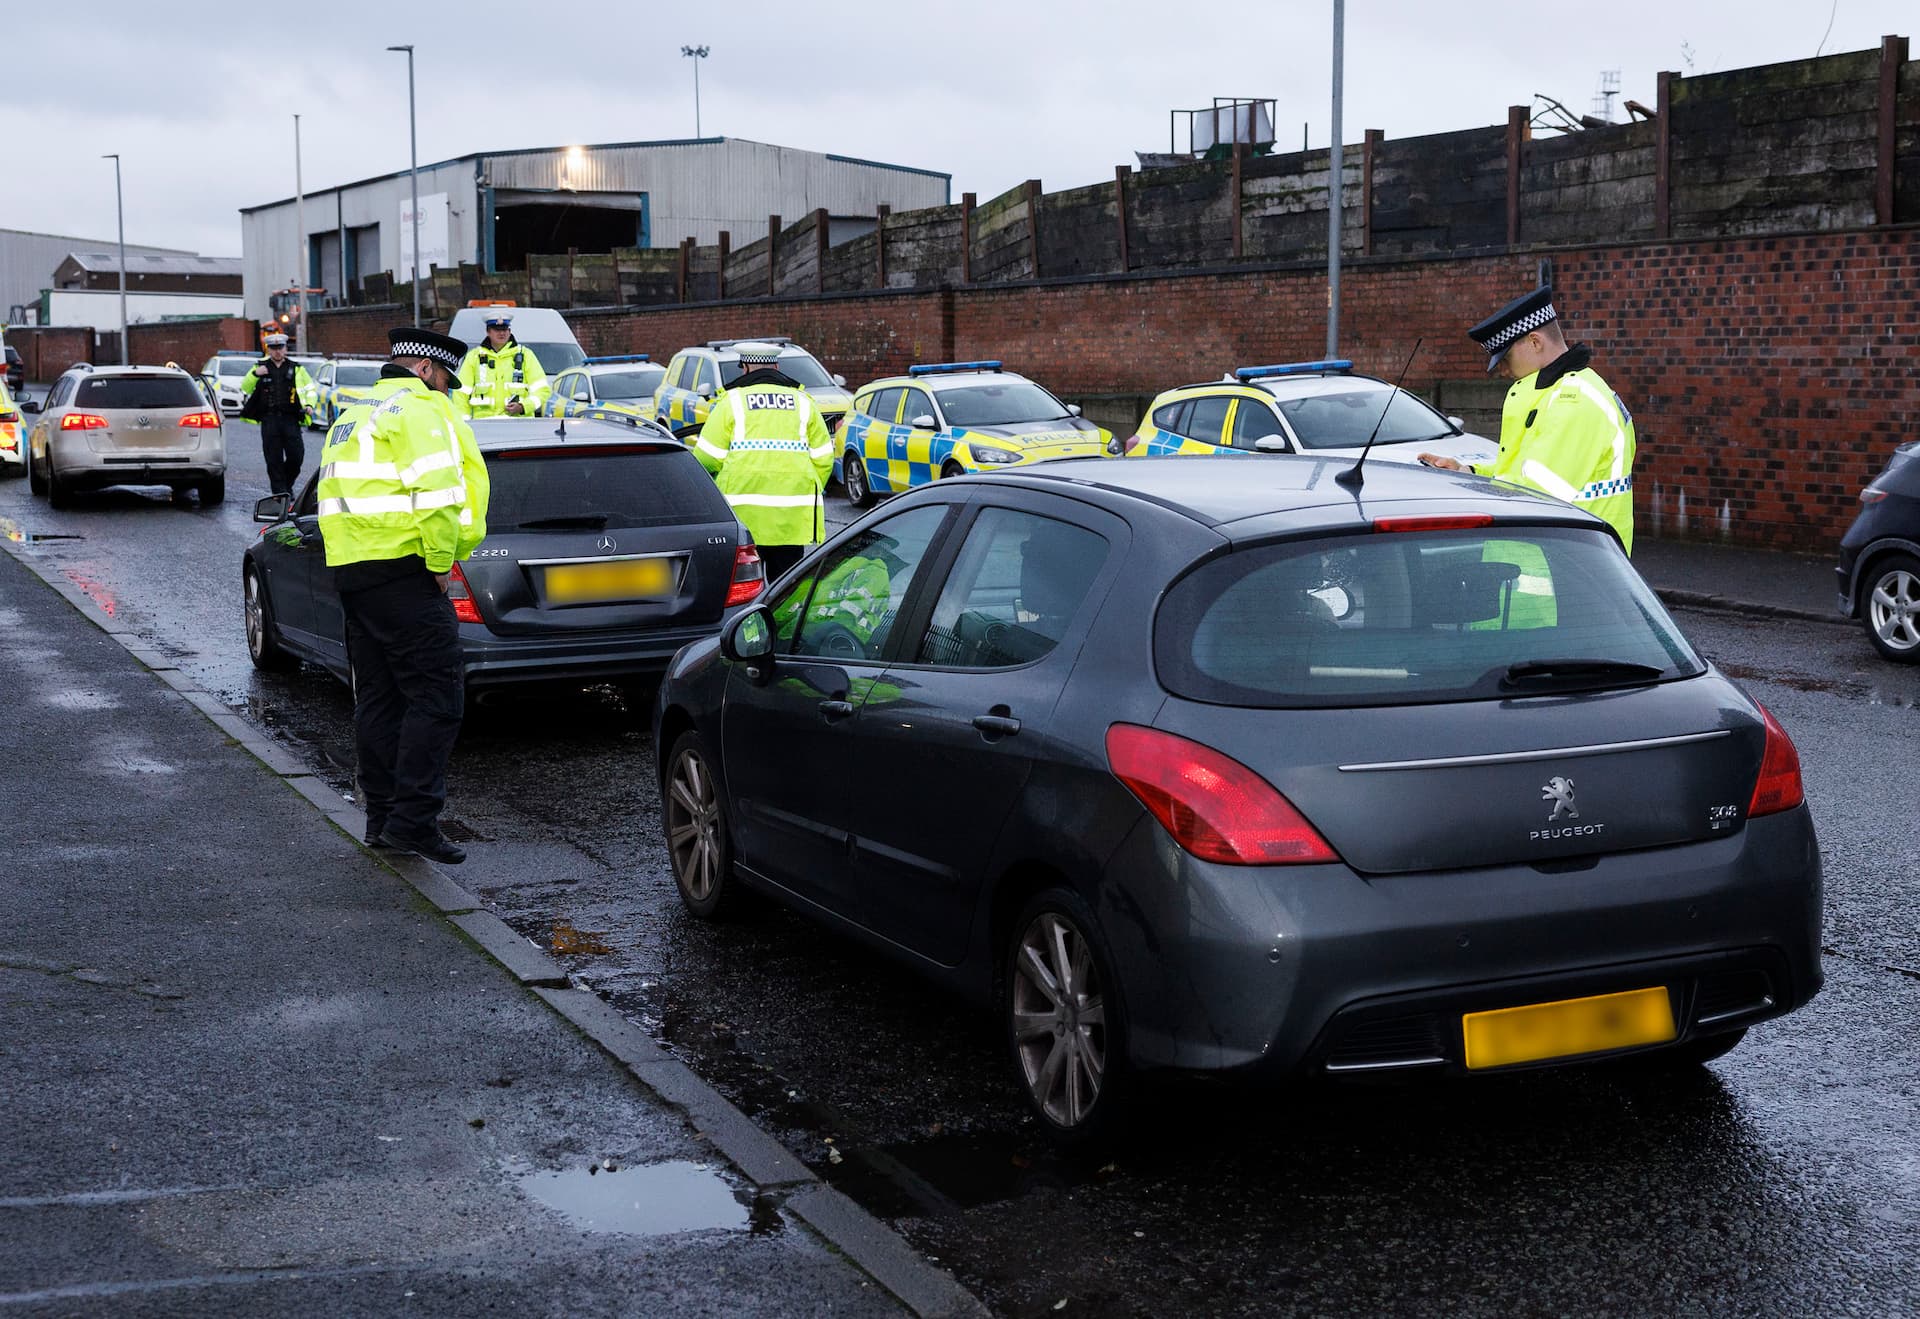 Vigilant Crackdown on Drink and Drug Driving During the Festive Season